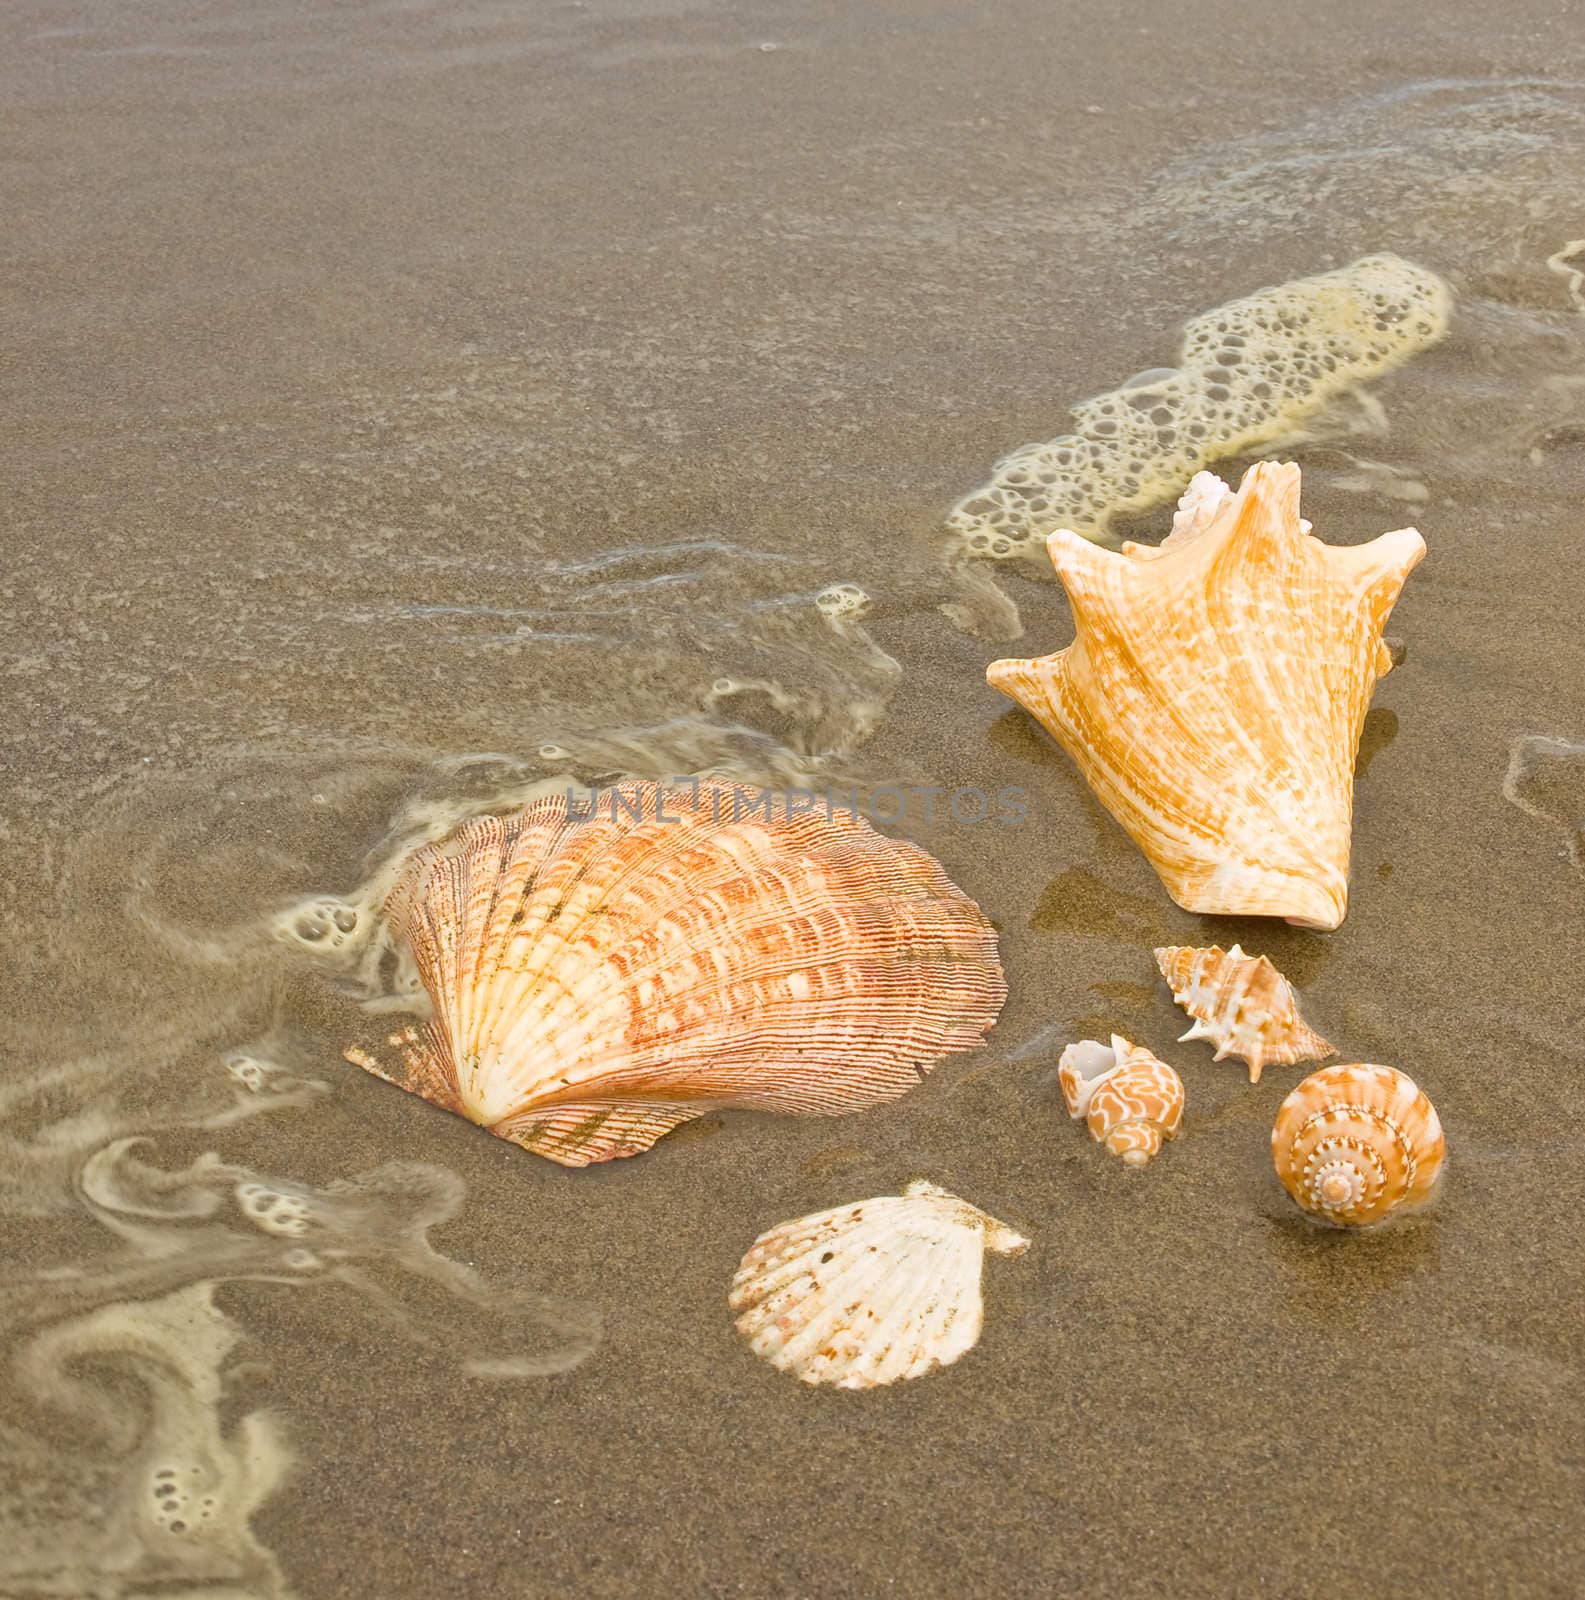 Scallop and Conch Shells on a Wet Sandy Beach as an Ocean Ripple Approaches